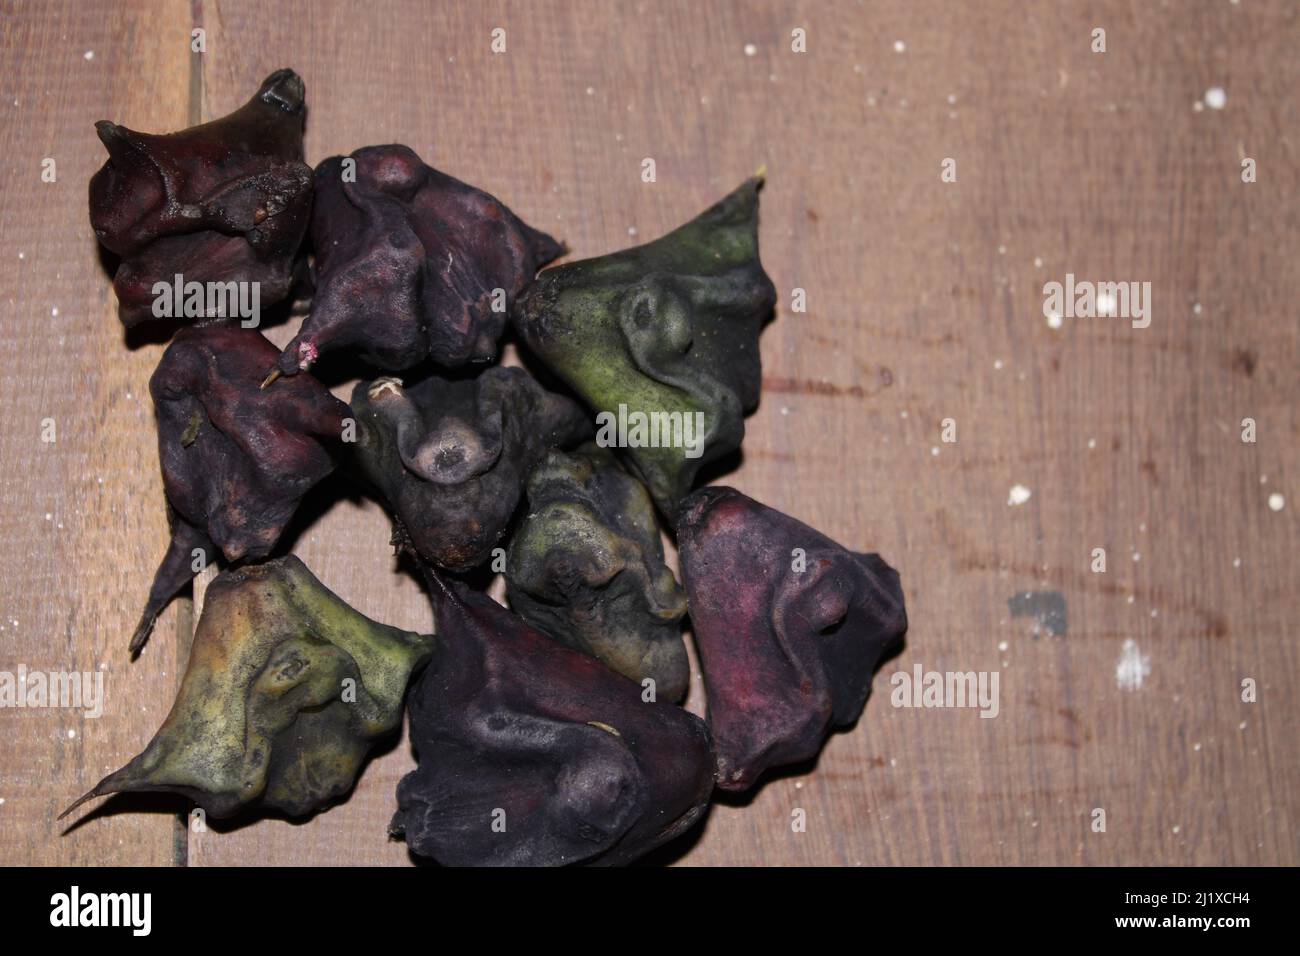 caltrop, indian sweet food singhra ( water caltrop fruit ) on the wooden background. Stock Photo